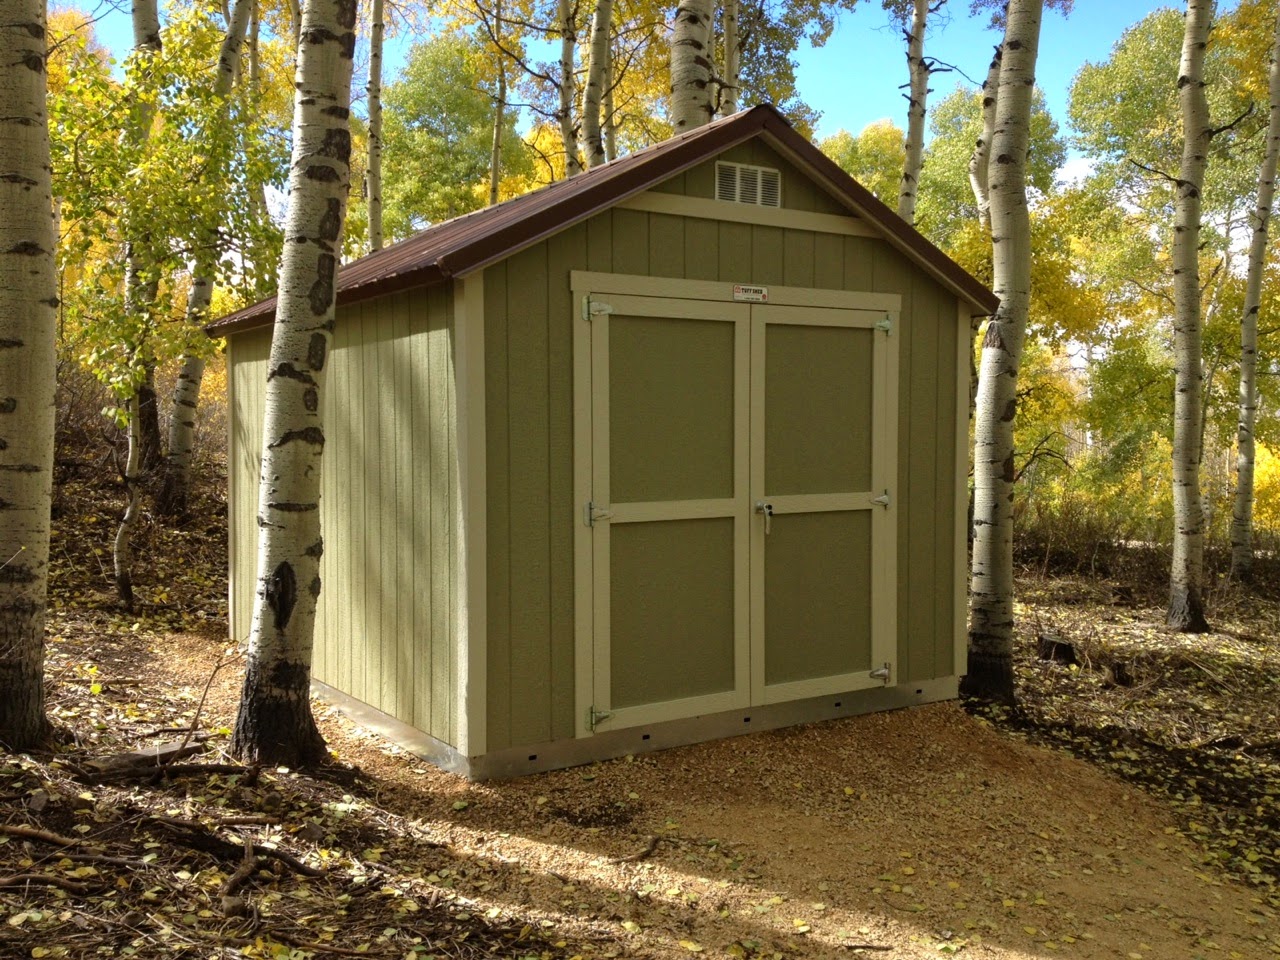 TUFF SHED at The Home Depot: TUFF SHED's Monthly Features